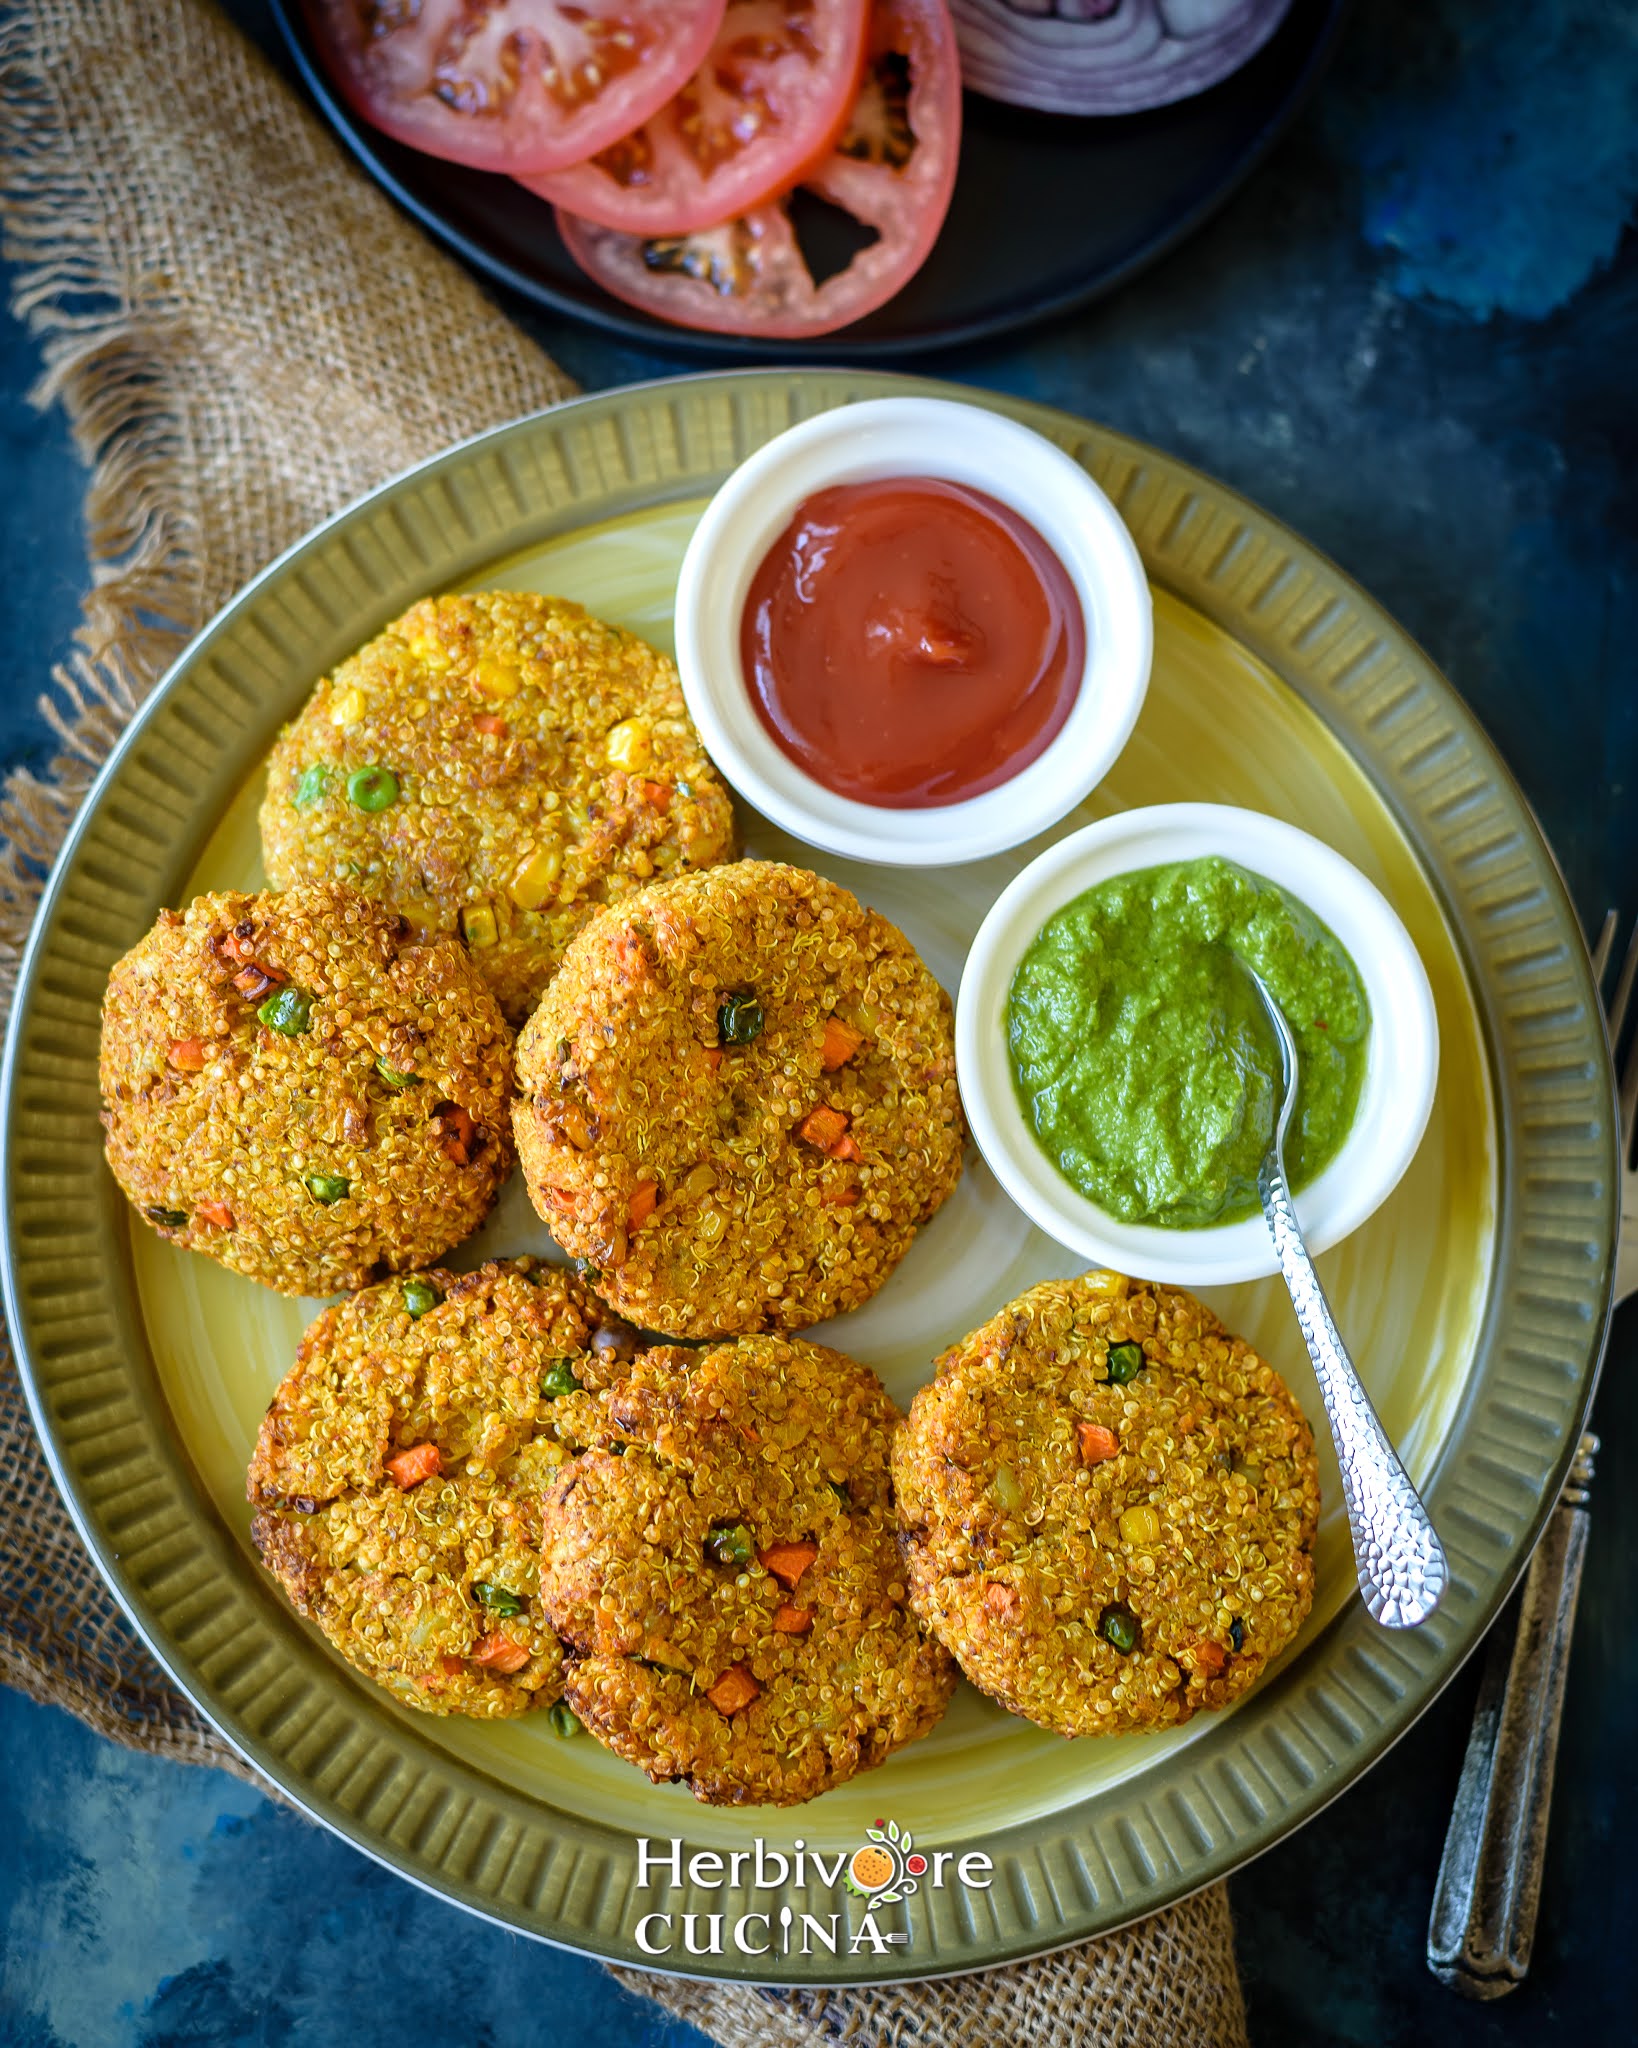 Green plate with quinoa patties served with cilantro chutney and tomato ketchup on the side. 